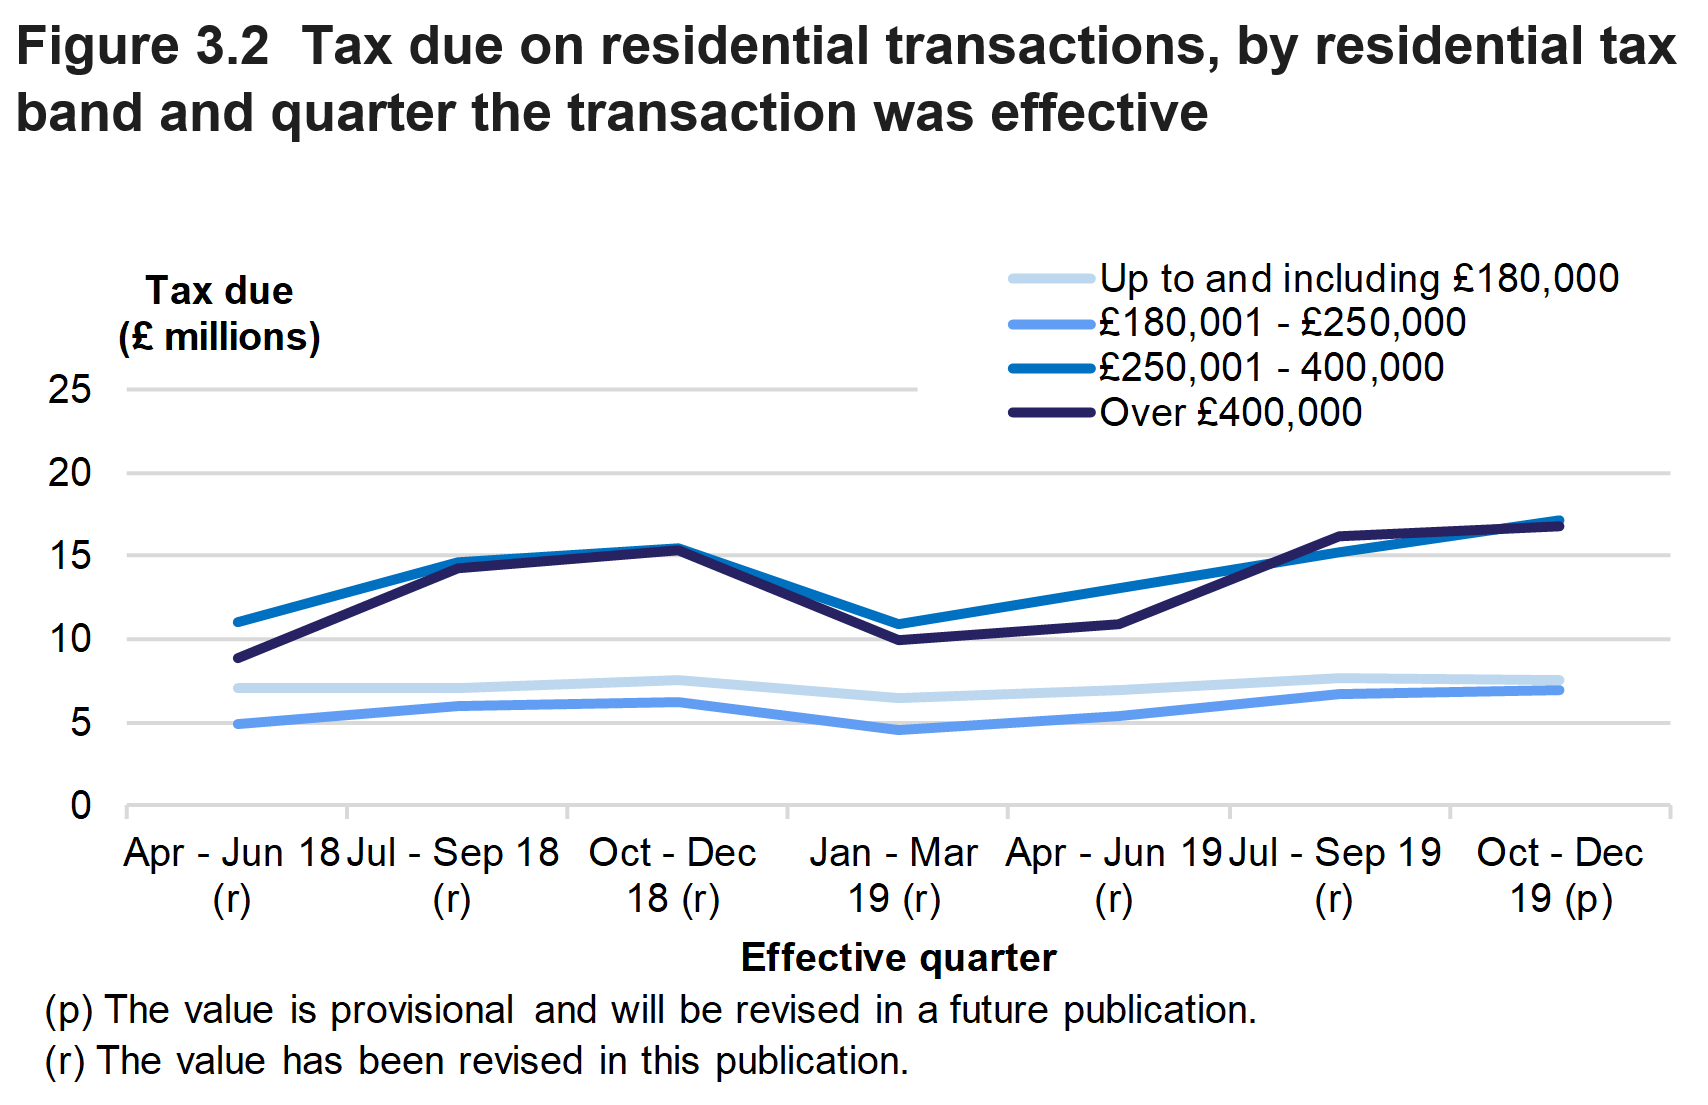 Figure 3.2 shows the tax due on residential transactions, by residential tax band and the quarter the transaction was effective.